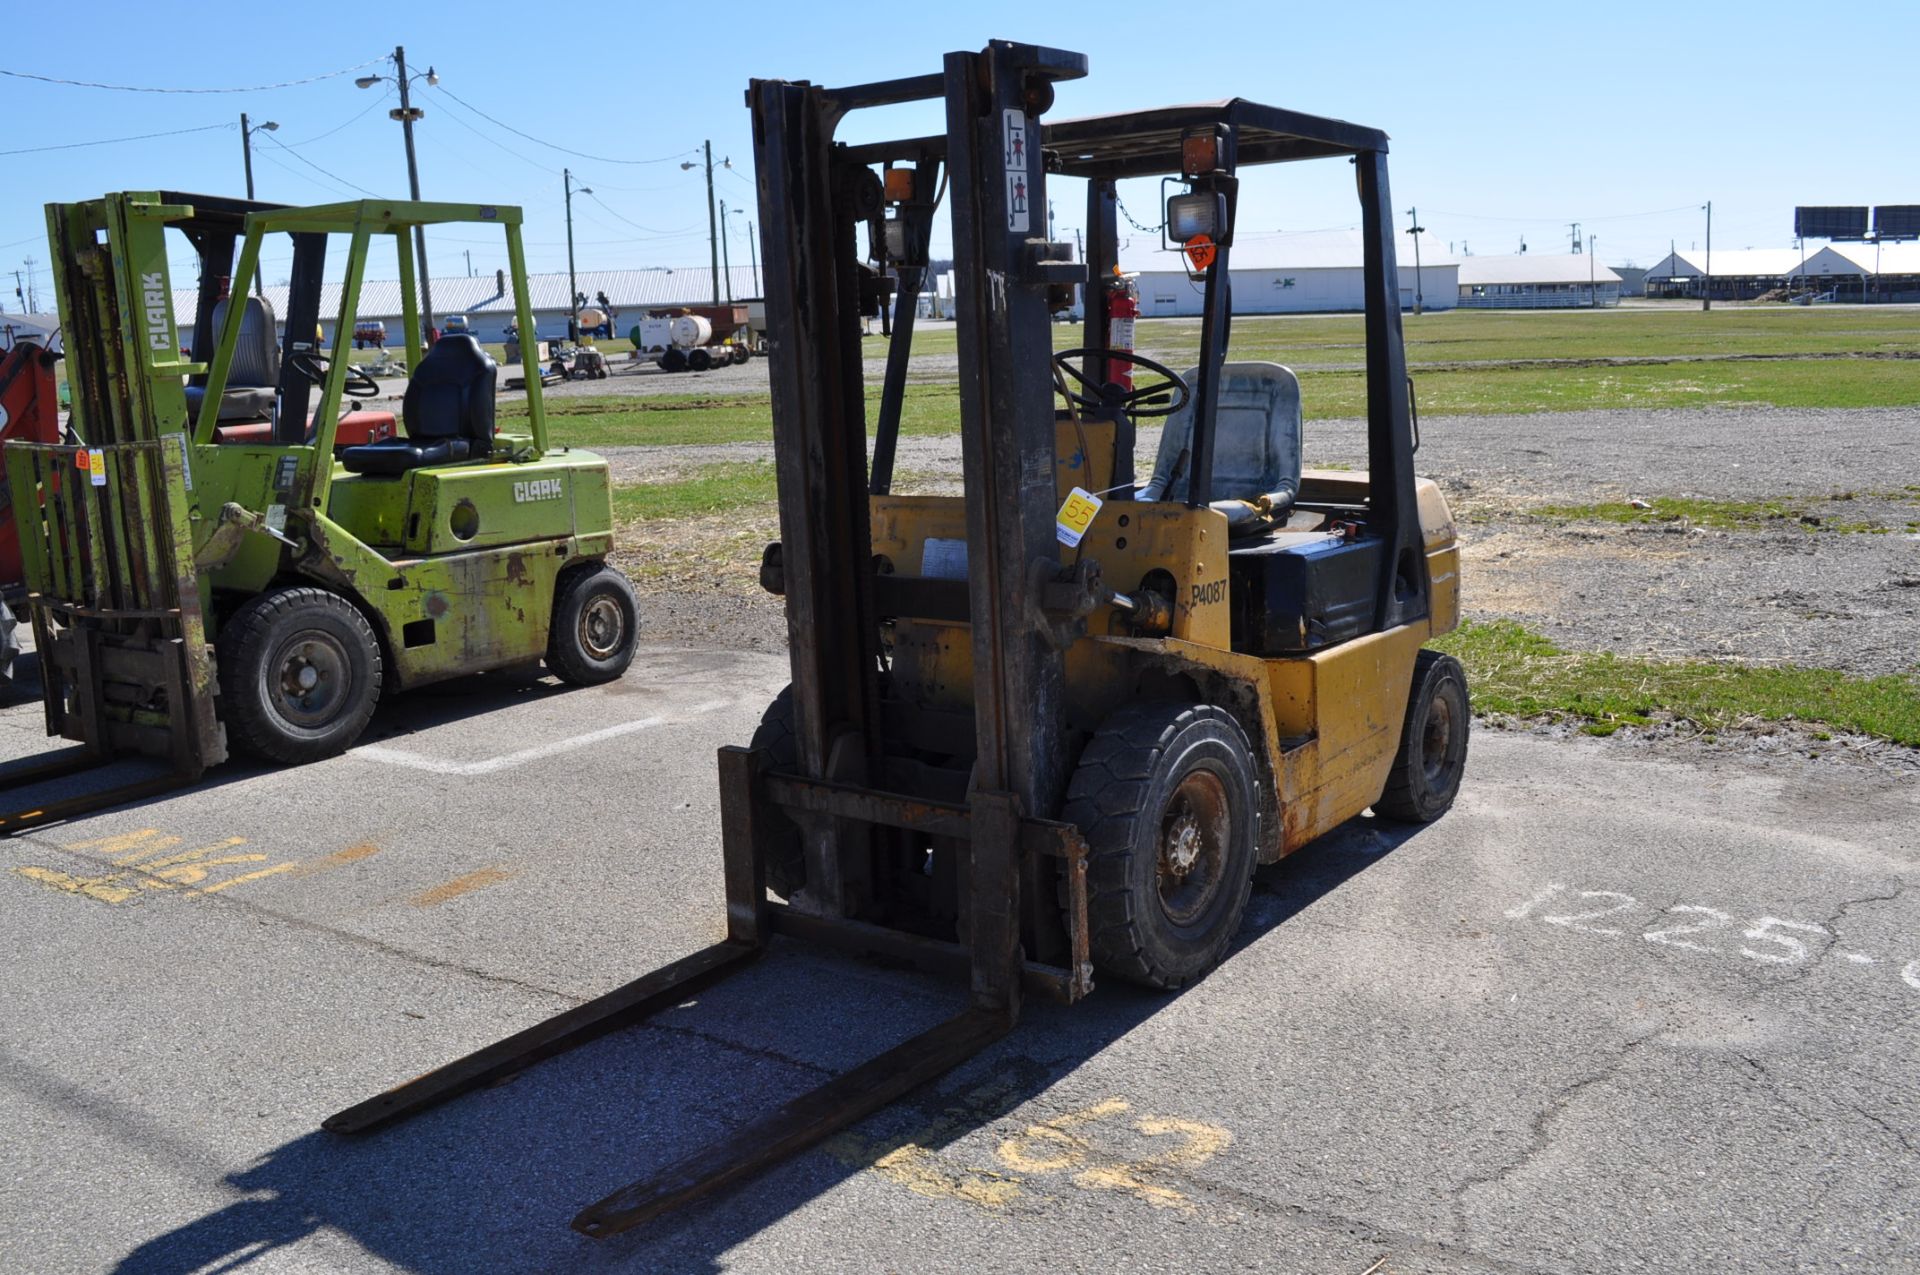 King Forklift 5000 lb capacity, pneumatic tires, gasoline engine, SN AN428